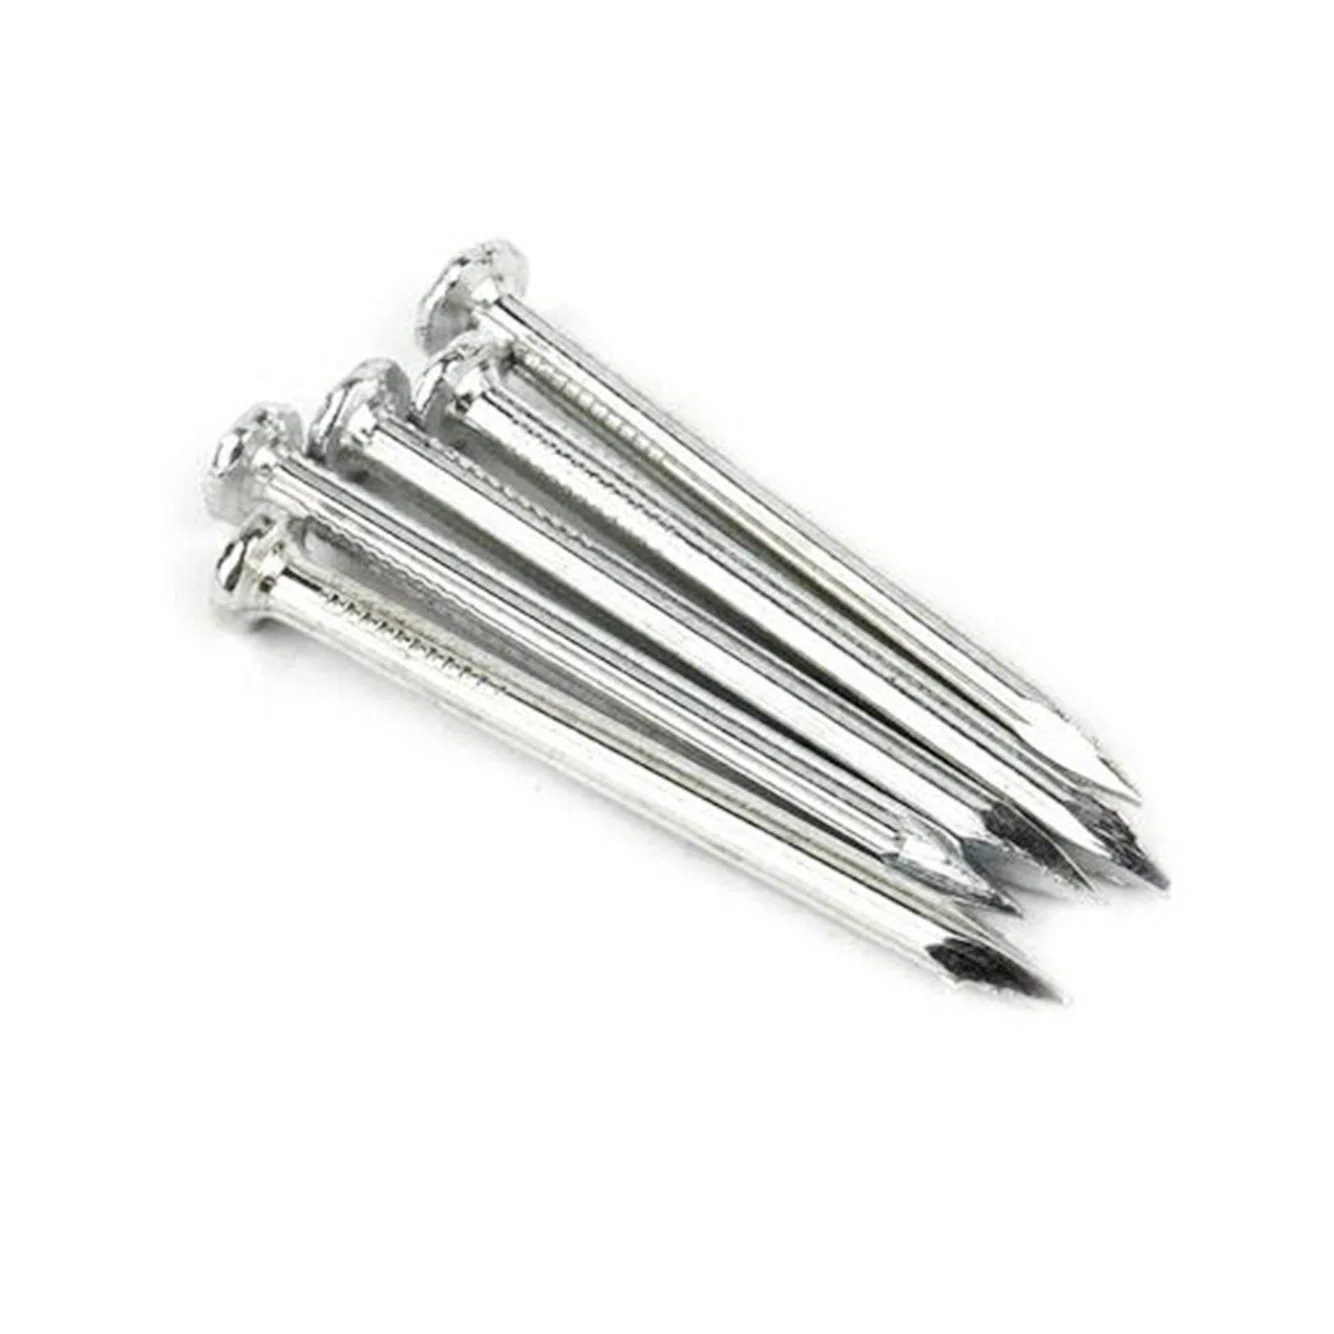 Buy Construction Nails Steel Concrete Nails Common Iron Nail for Building Construction and Other Industrial Domestic Use